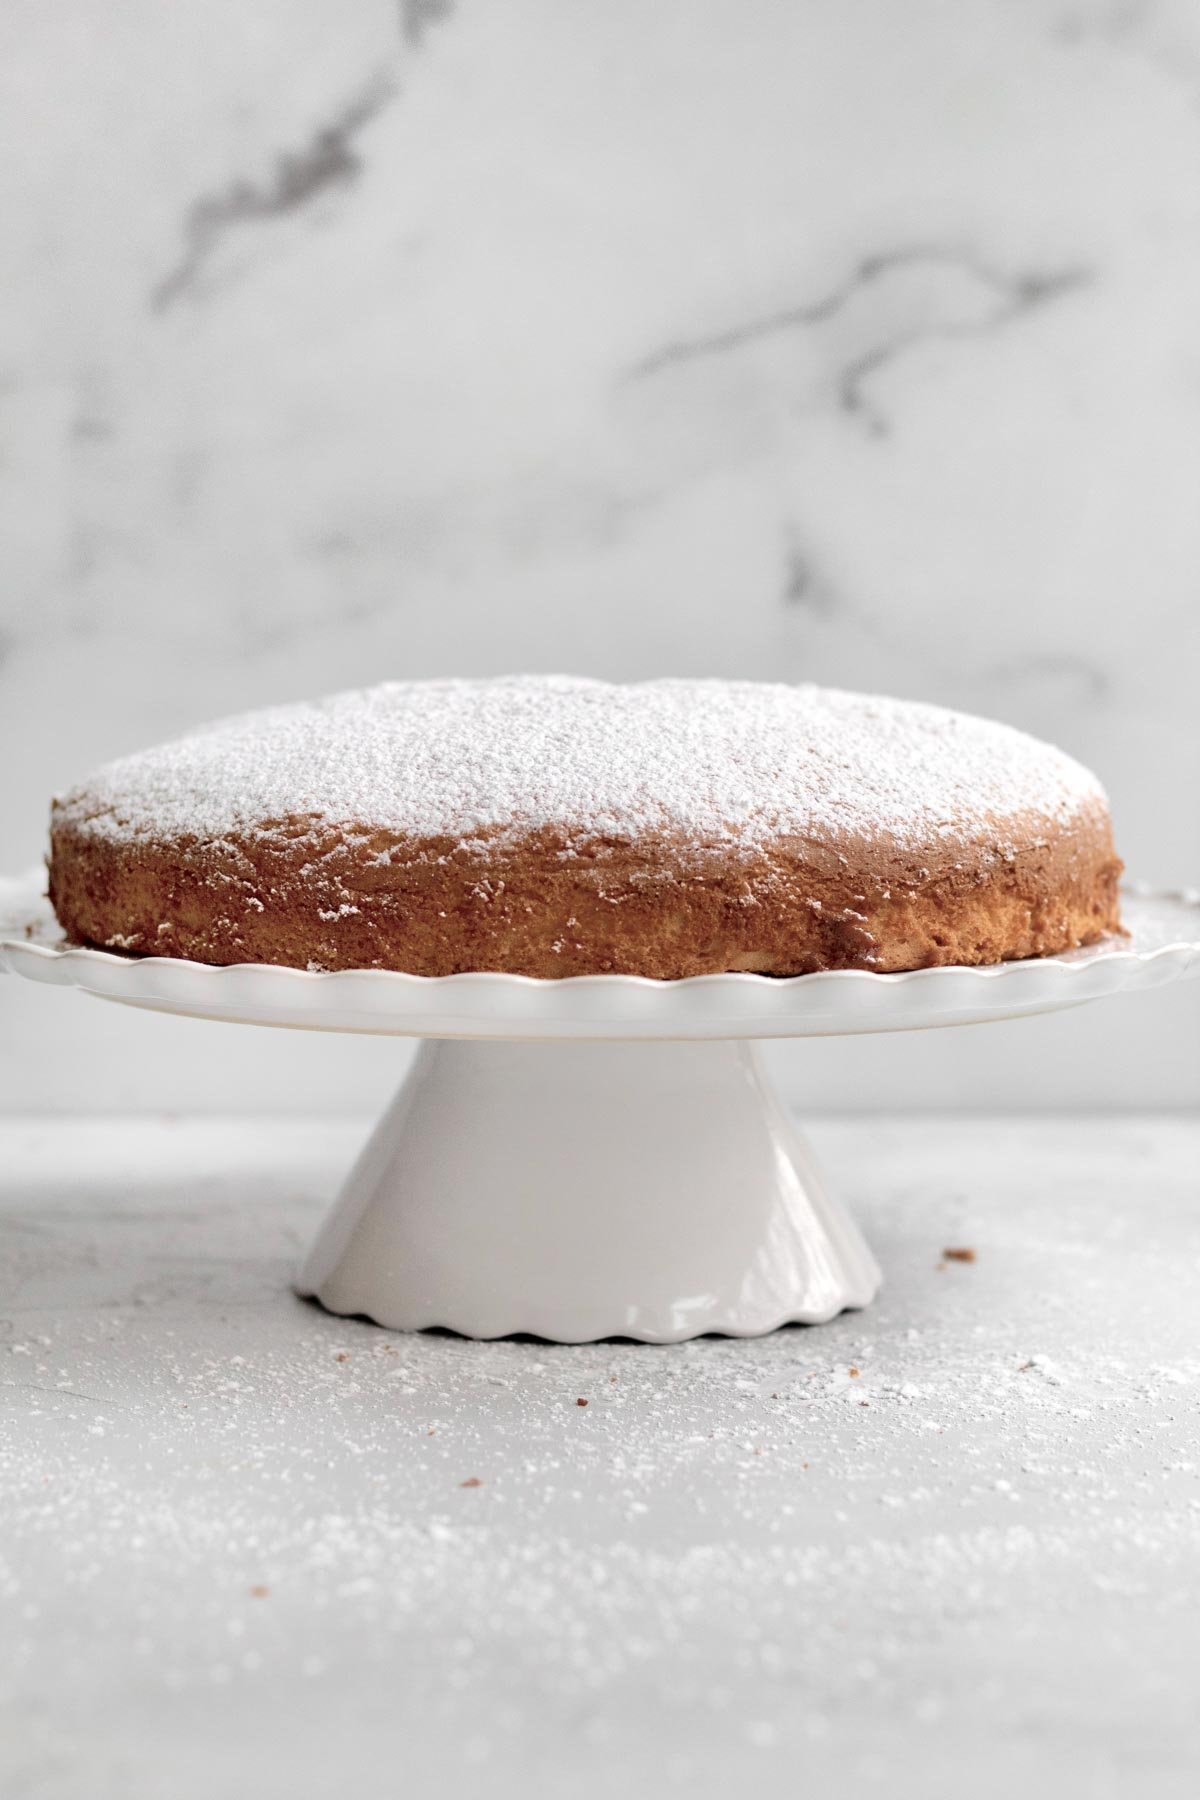 Lightly dusted with confectioners' sugar, this Irish Tea Cake sits on a cake stand.